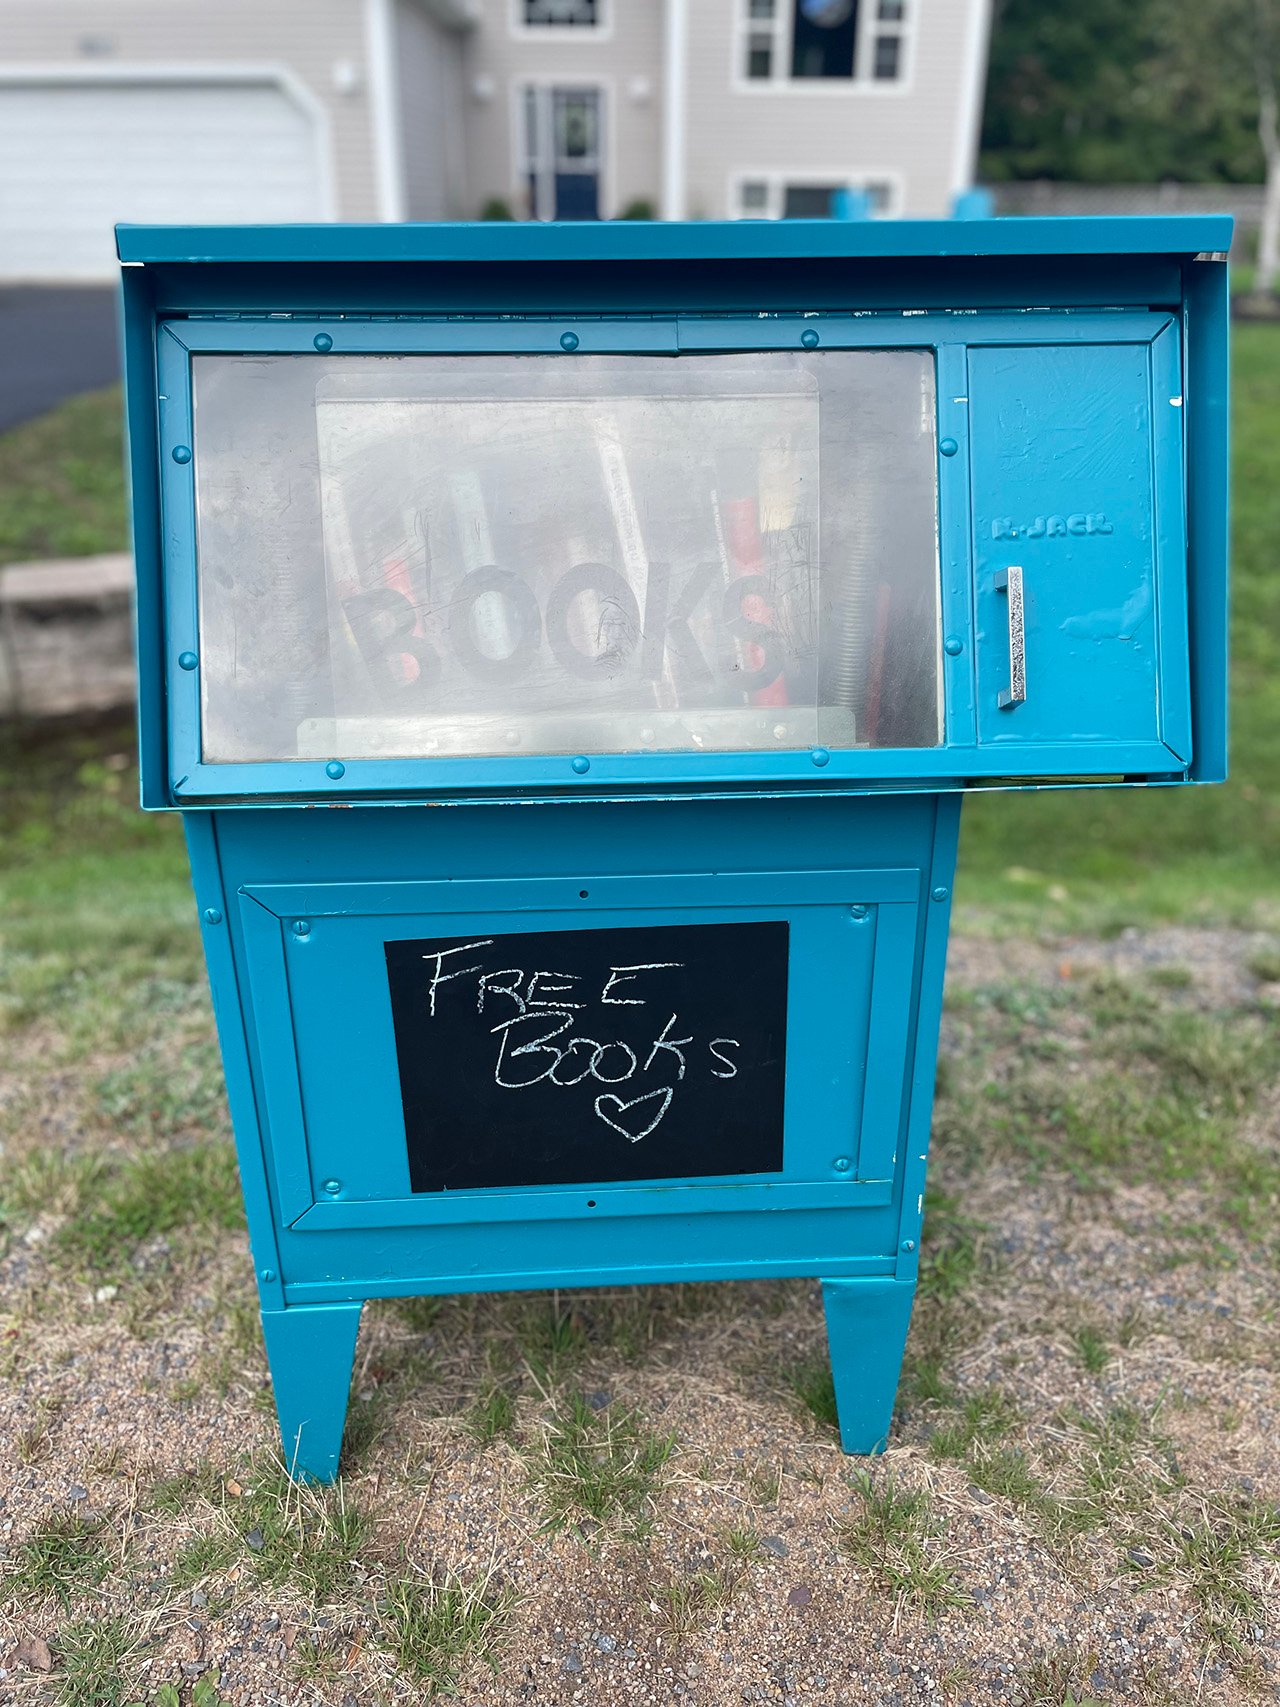 A close up of a blue Little Free library box, with a chalkboard sign saying "free books" with a heart drawn under it